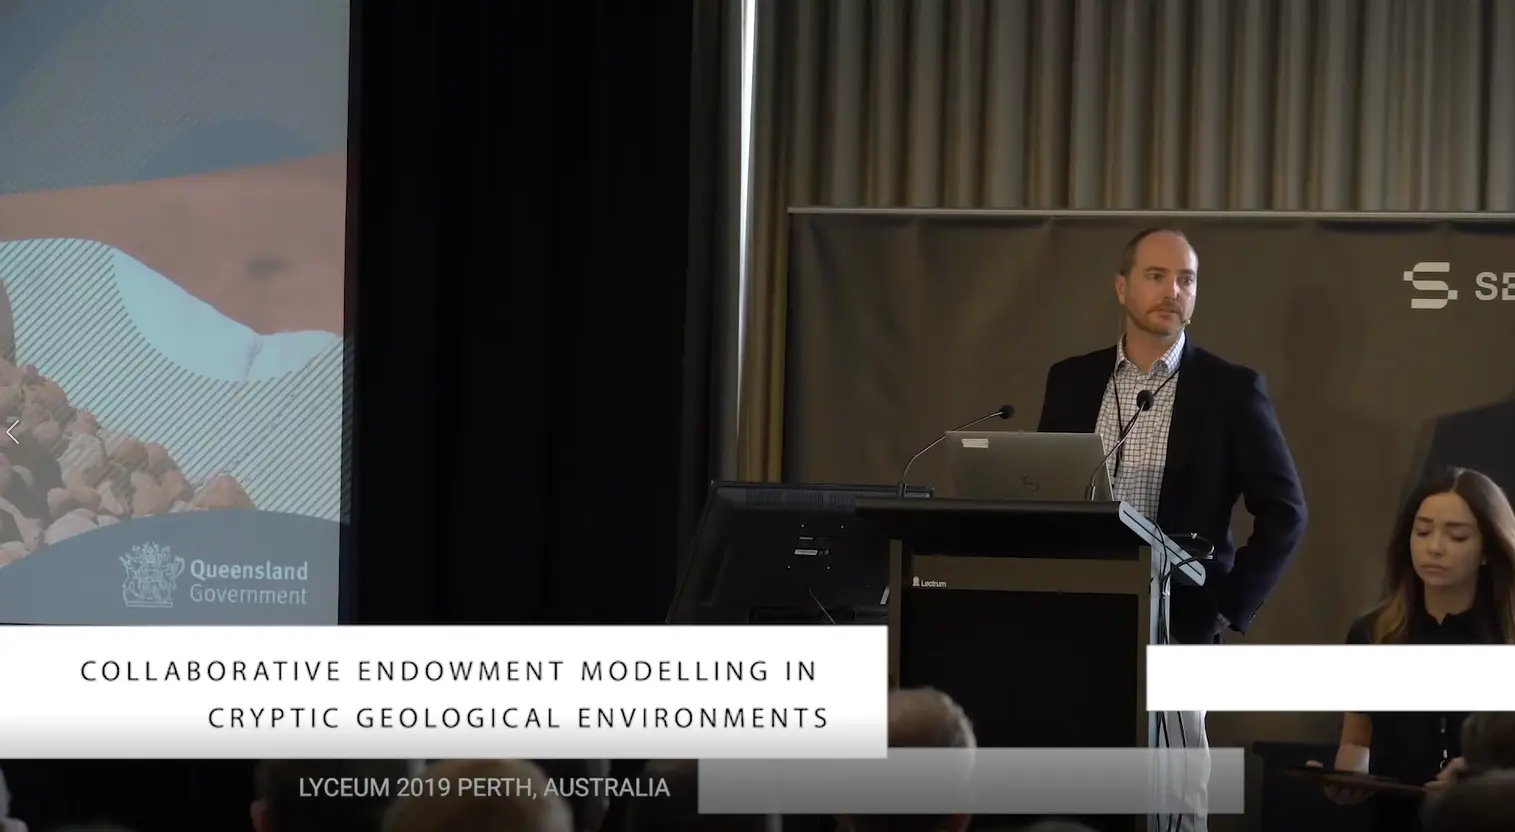 Collaborative Endowment Modelling in Cryptic Geological Environments